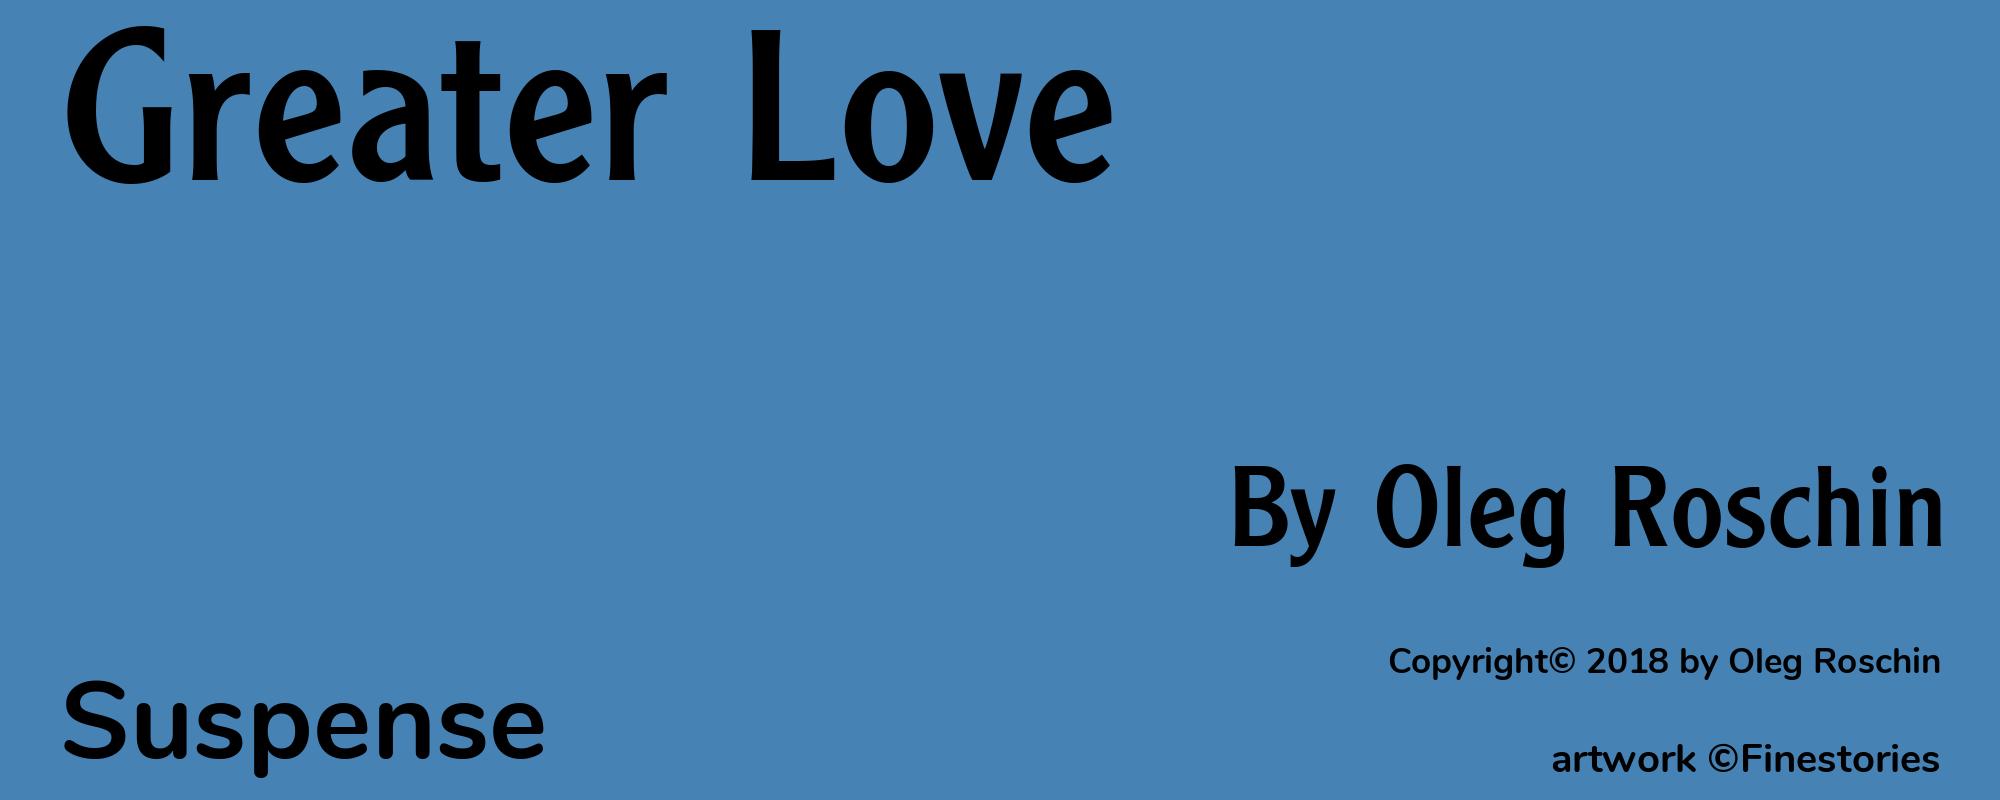 Greater Love - Cover